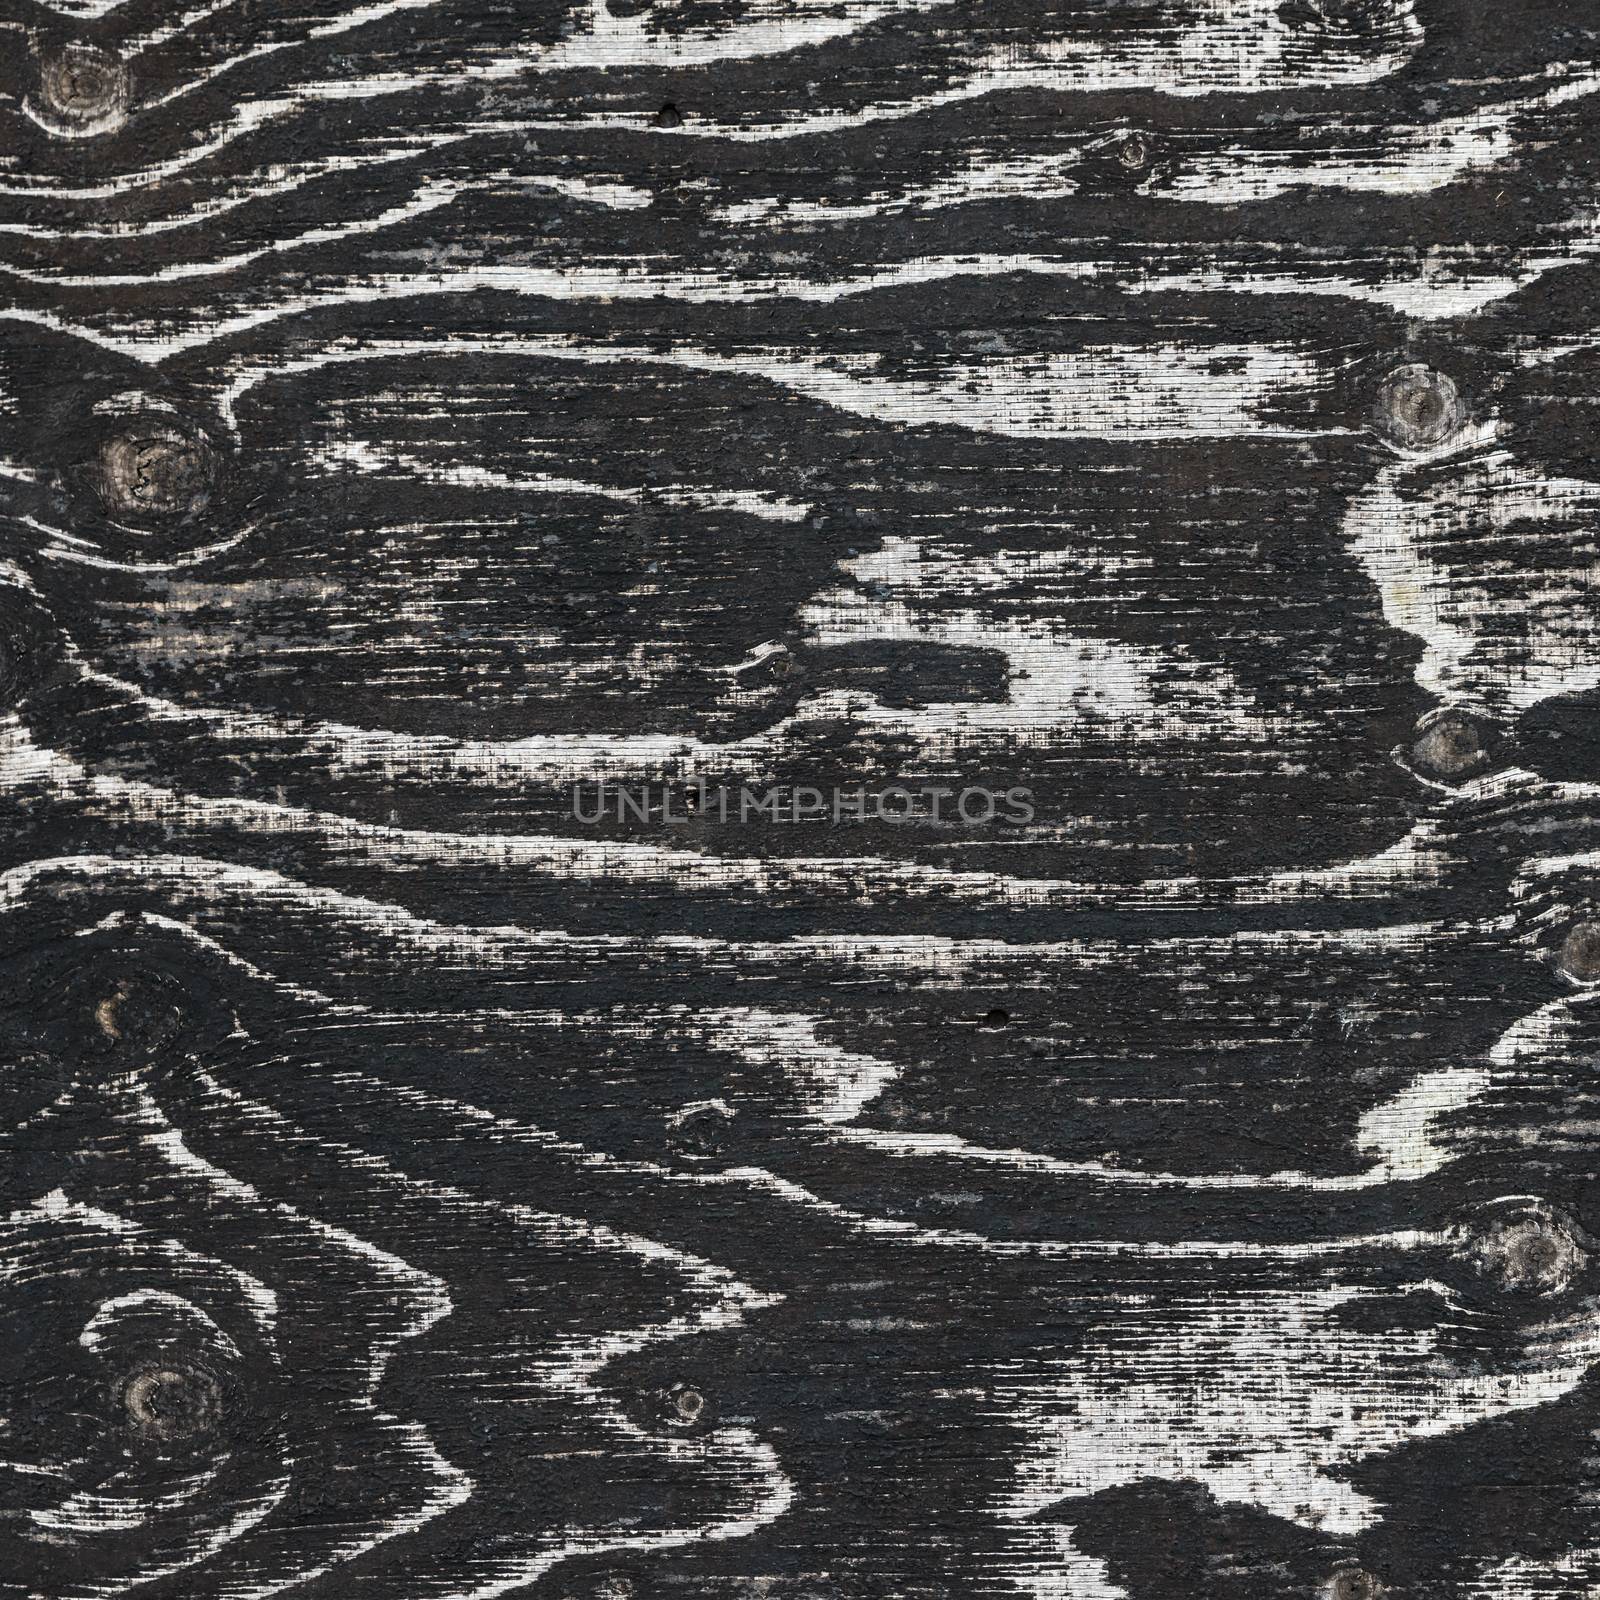 Dark wood texture, veins and knots clearly visible